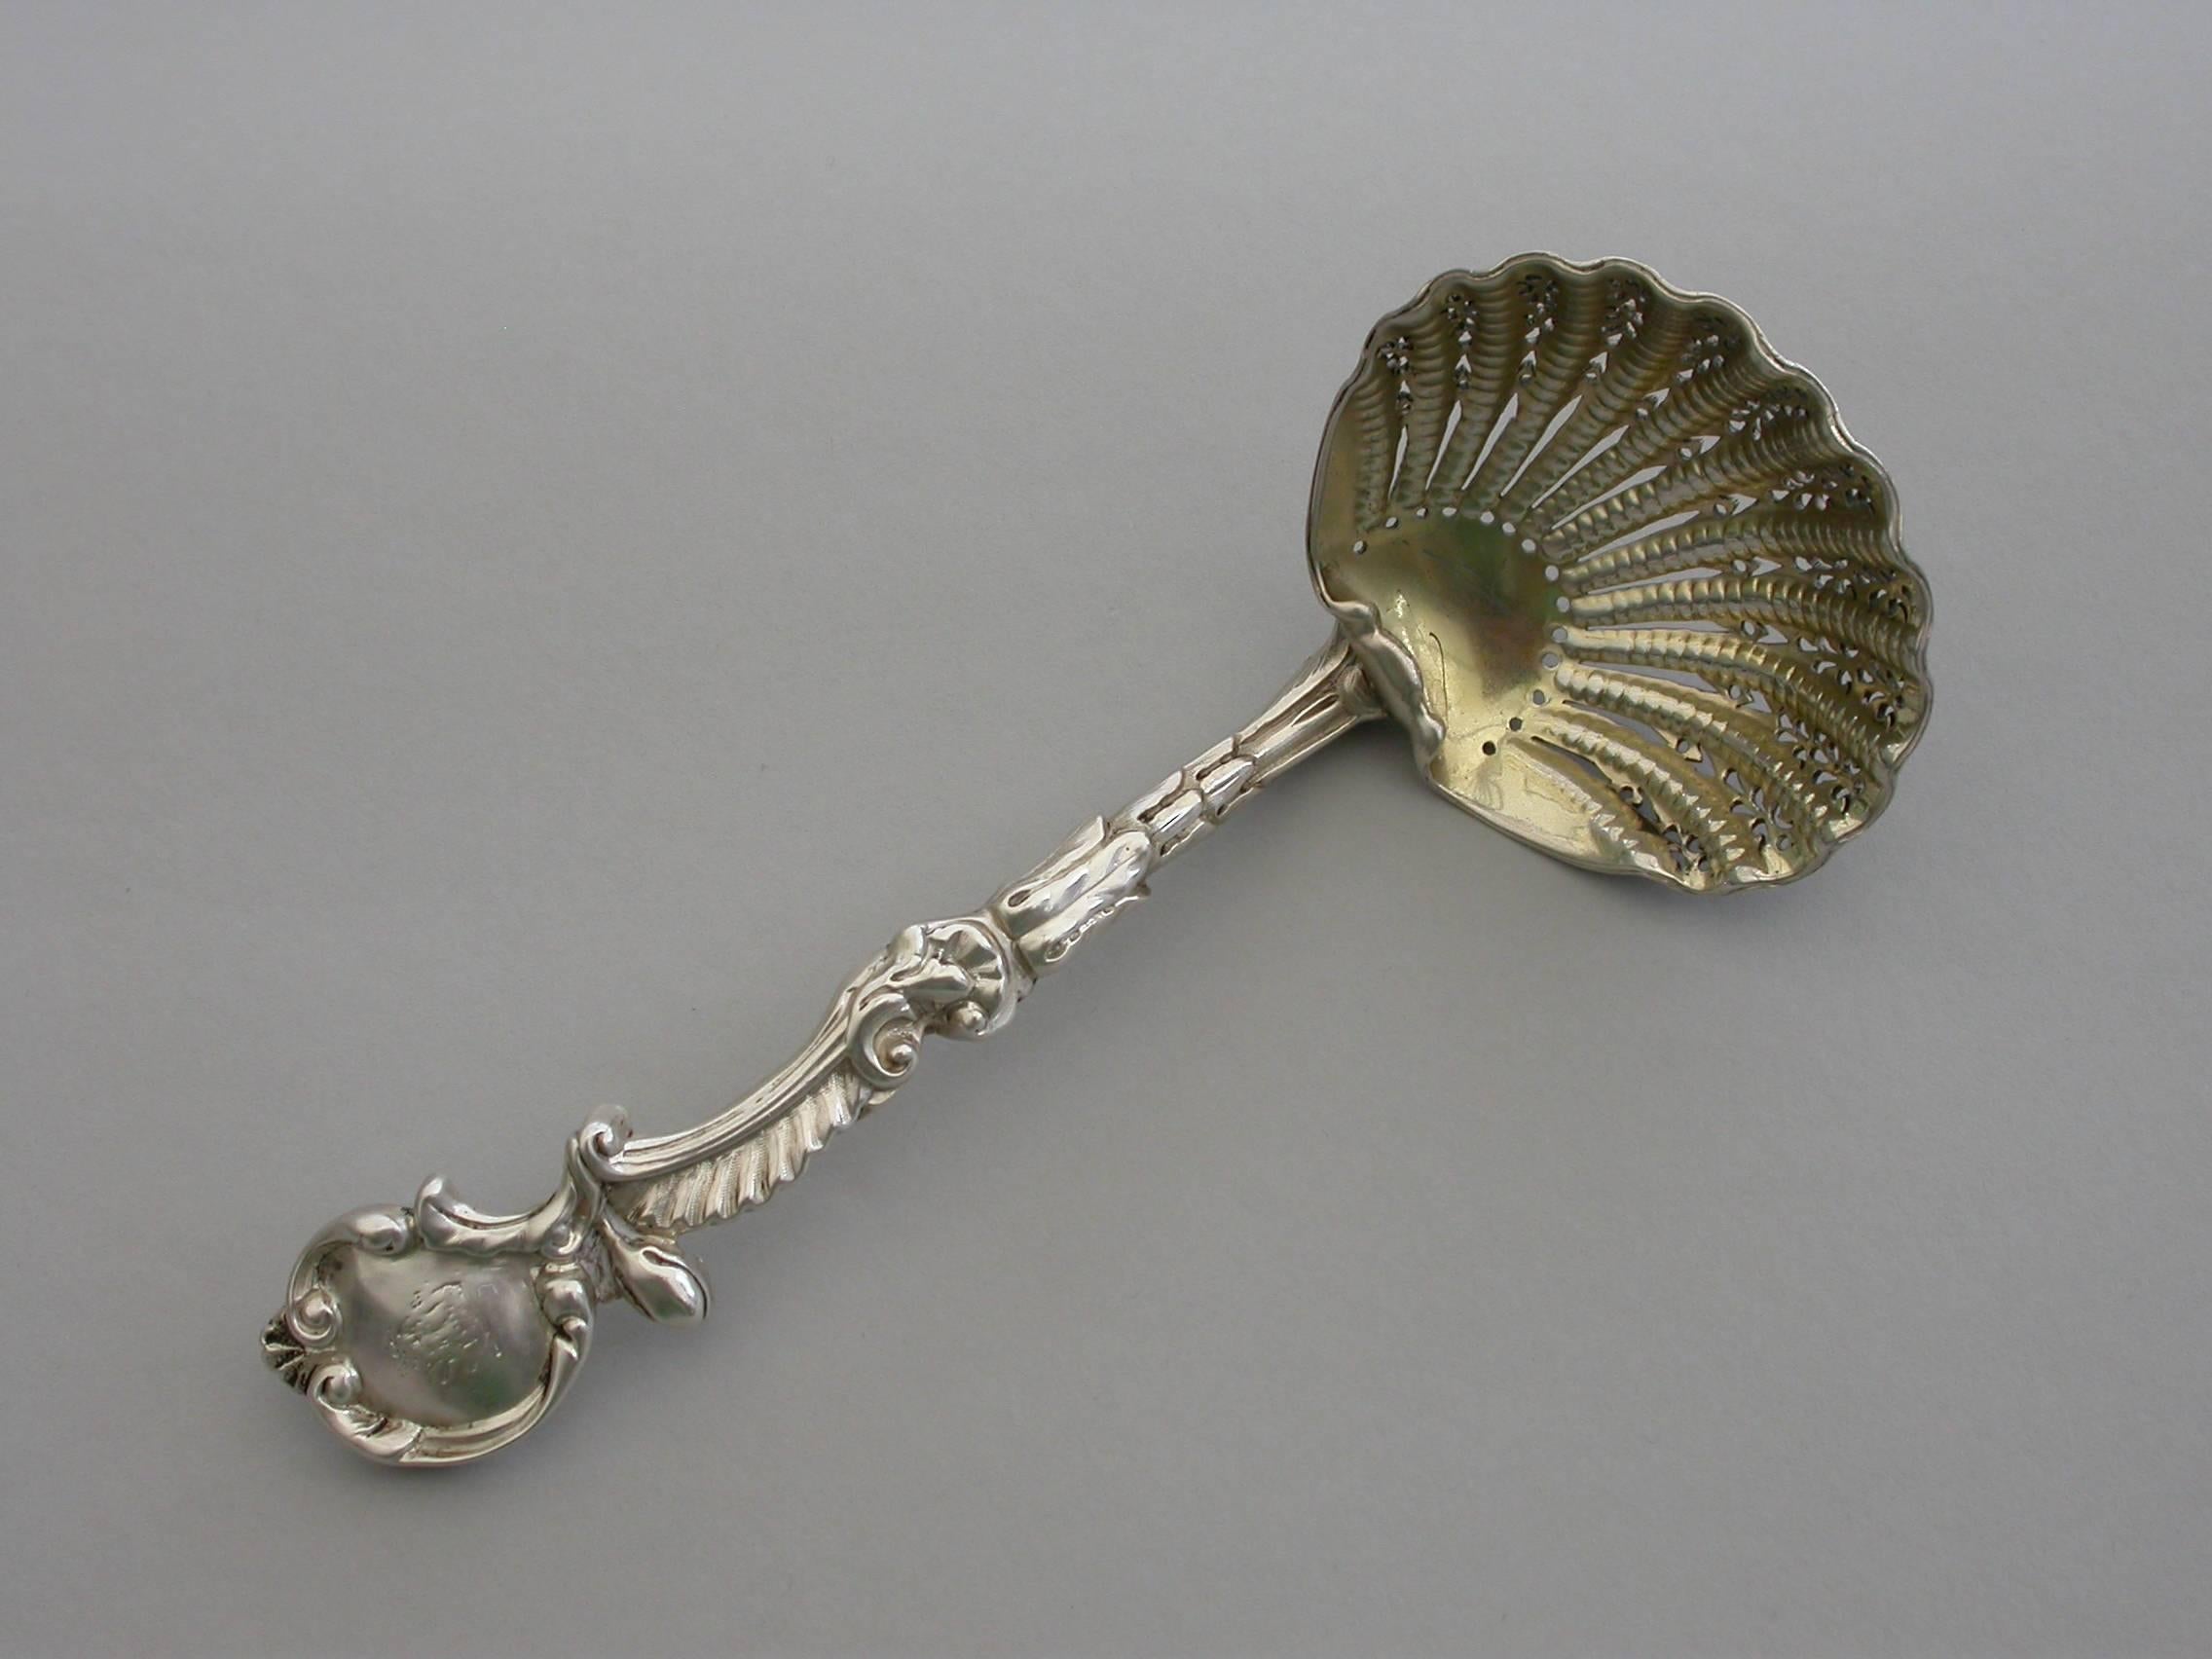 A good quality cast silver sugar sifter ladle with Rococo scroll pattern handle, the pierced gilded scallop shaped bowl with turned over rim.

By H J Lias & Son, London, 1871

In good condition with minor scratches to the gilded bowl and the